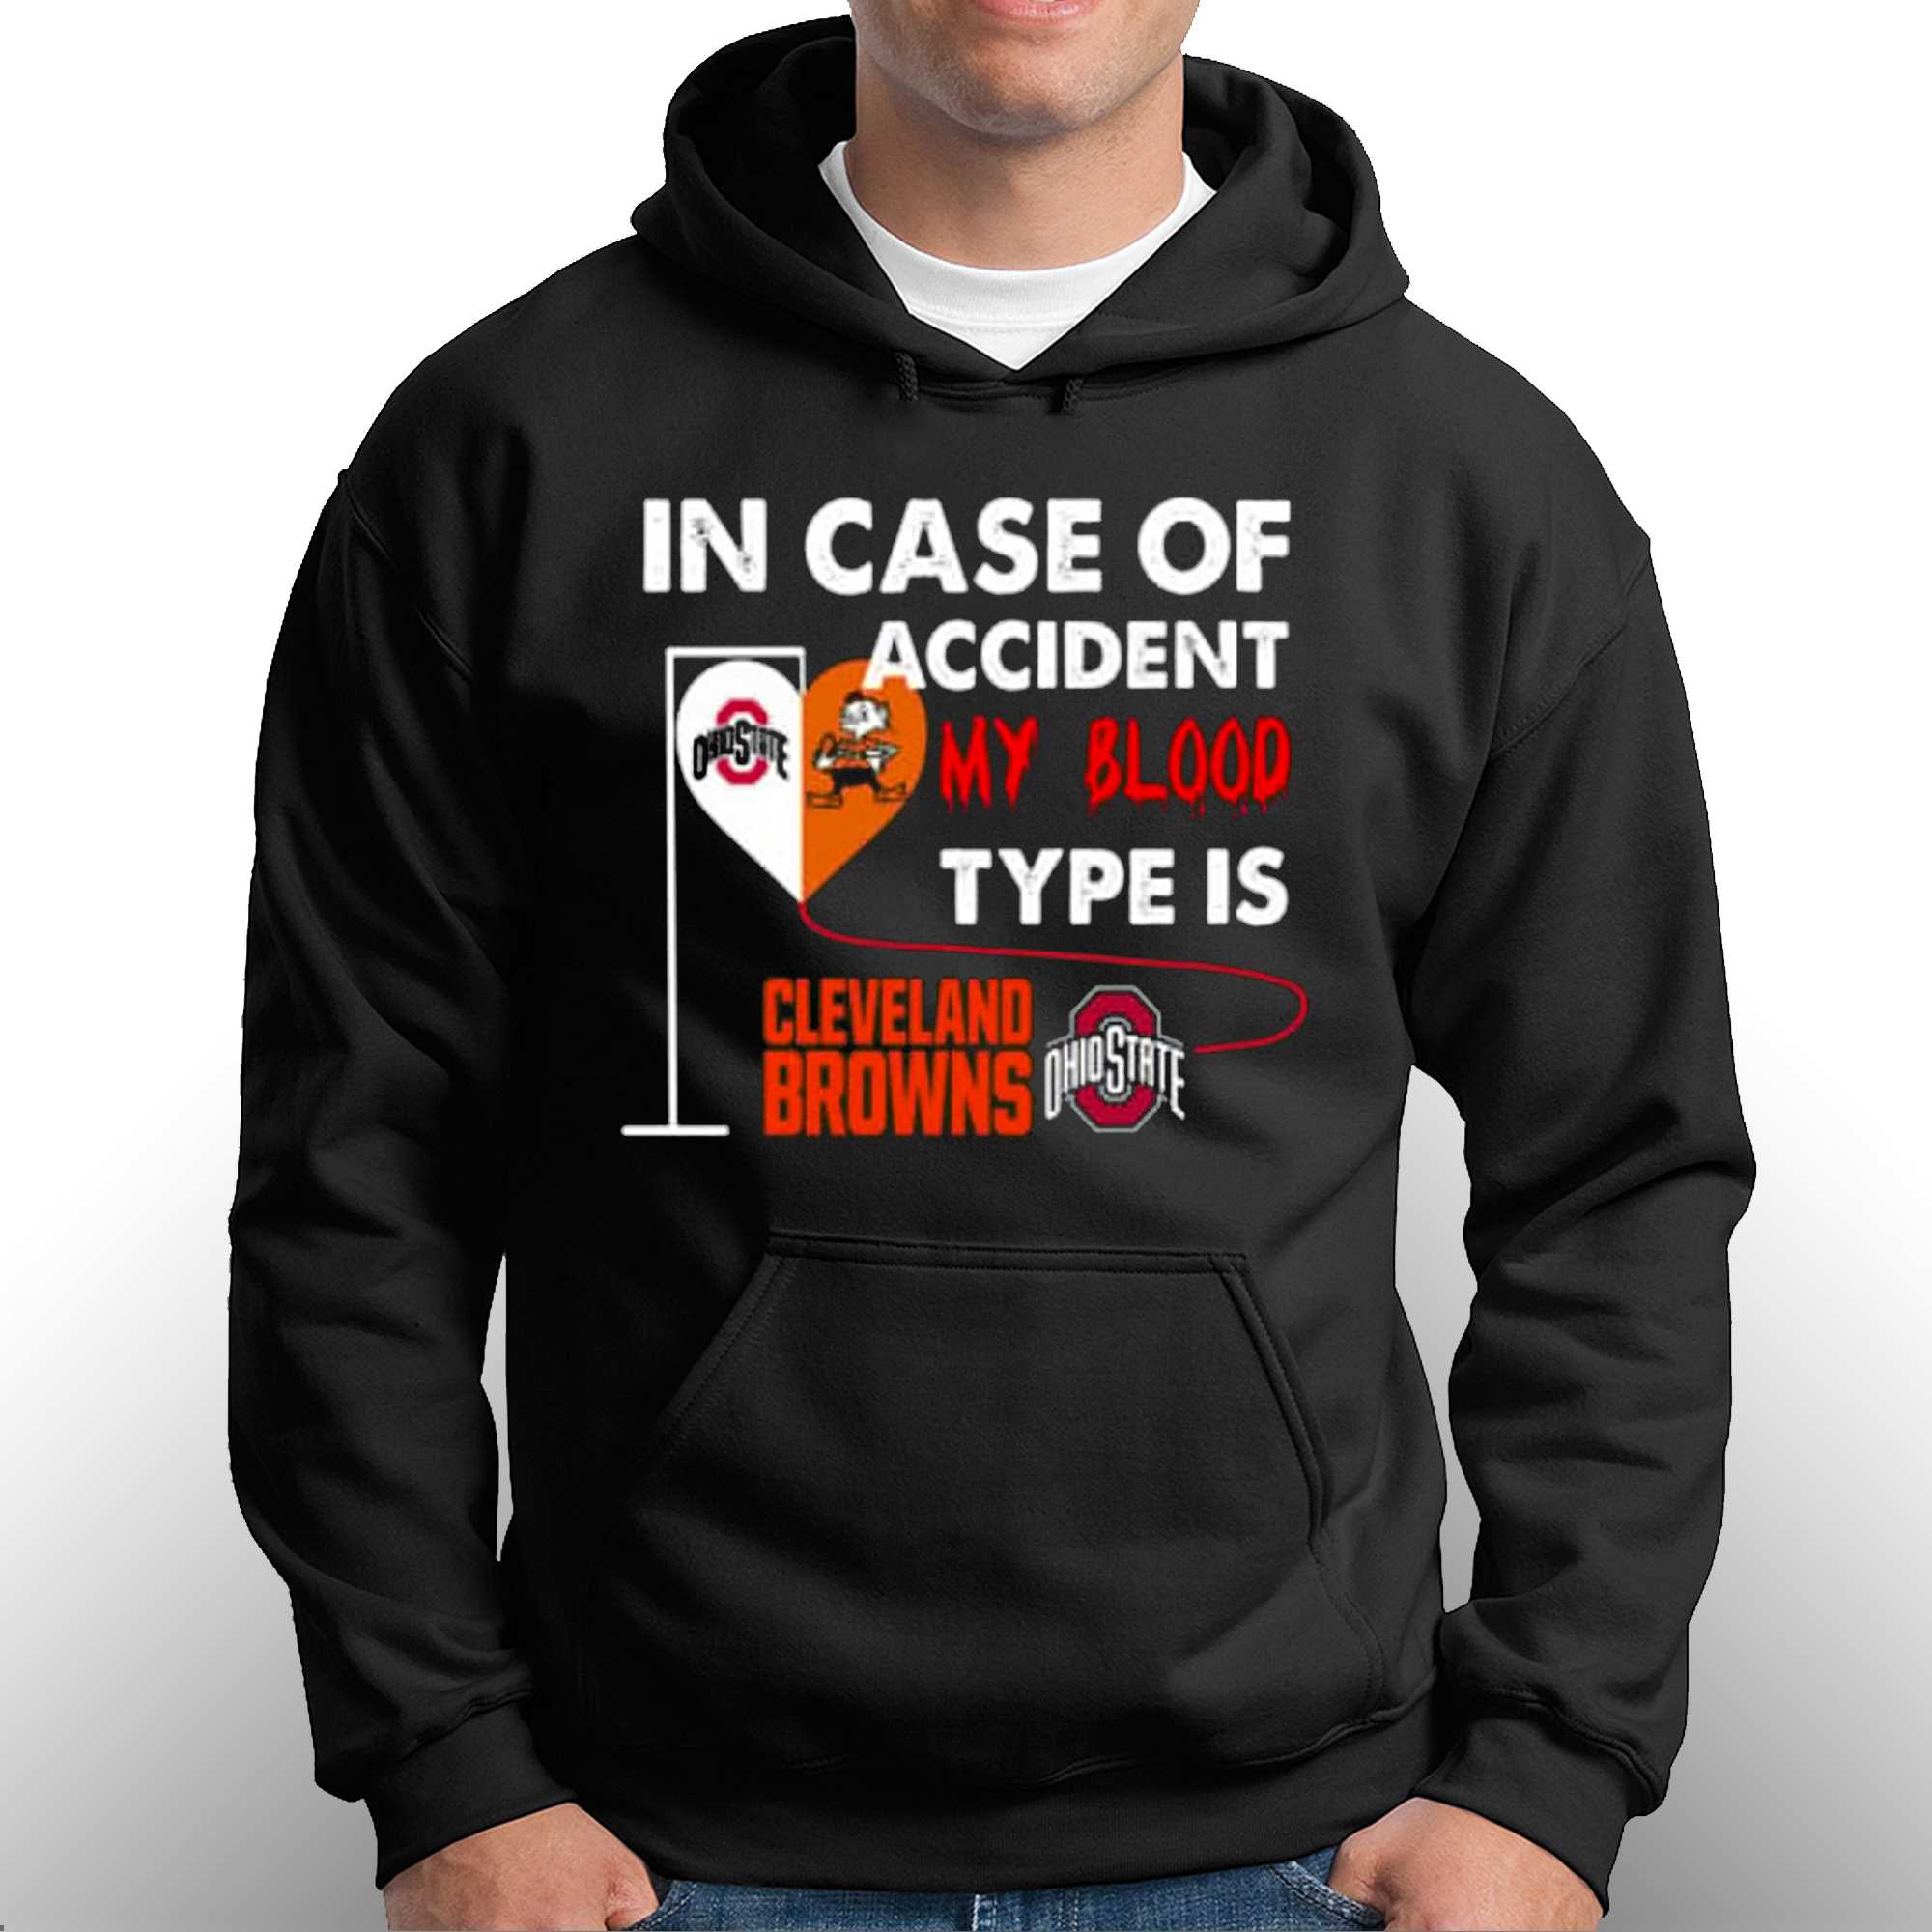 In Case Of Accident My Blood Type Is Cleveland Browns Ohiostate T-shirt  Sweatshirt Hoodie